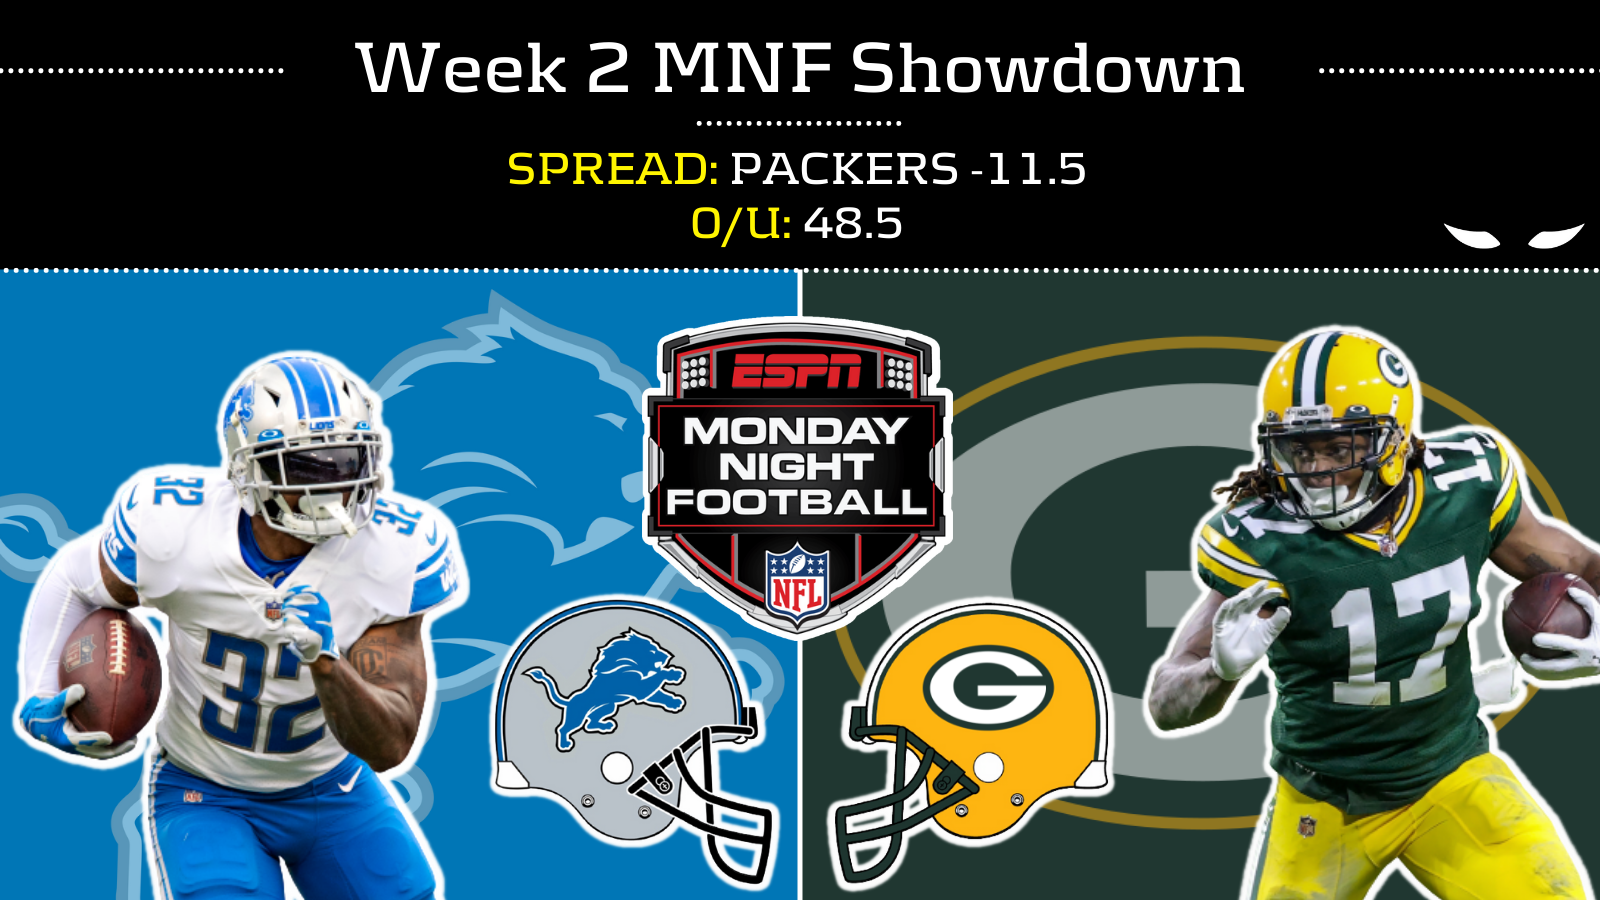 Week 2 MNF Showdown: Detroit Lions at Green Bay Packers